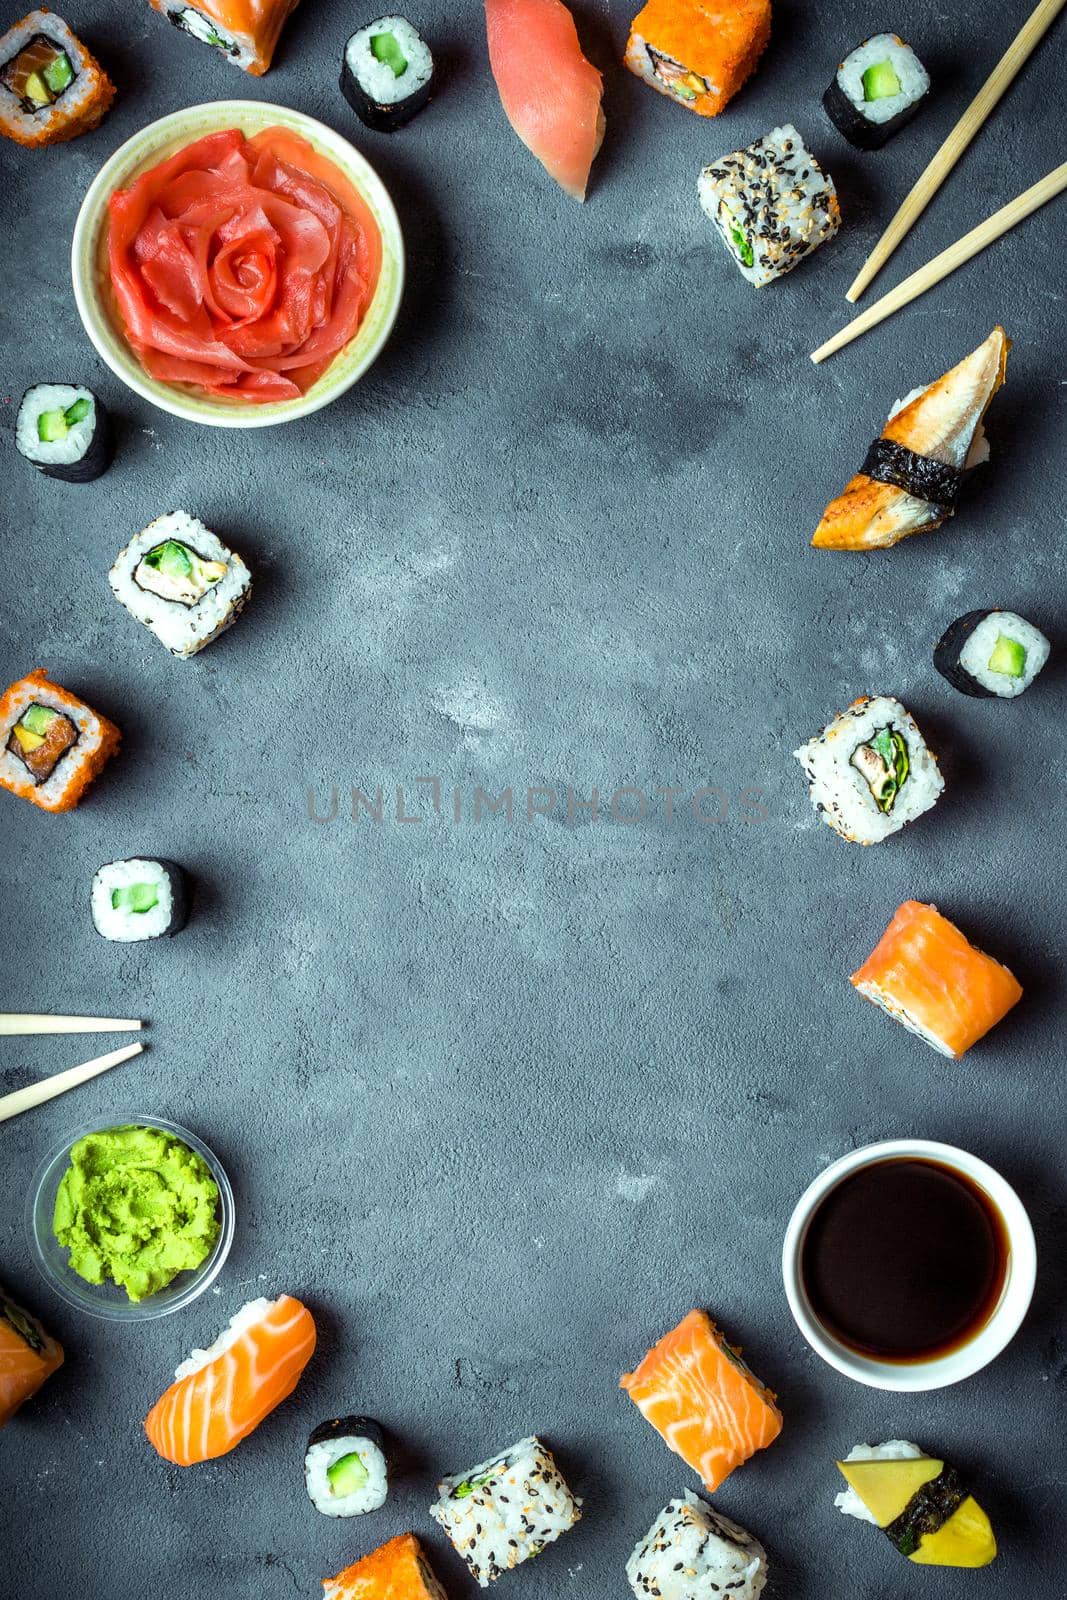 Japanese sushi on a dark background. Sushi rolls, nigiri, maki, pickled ginger, wasabi, soy sauce. Sushi set on a table. Space for text. Top view. Sushi background. Asian or Japanese food frame. Toned